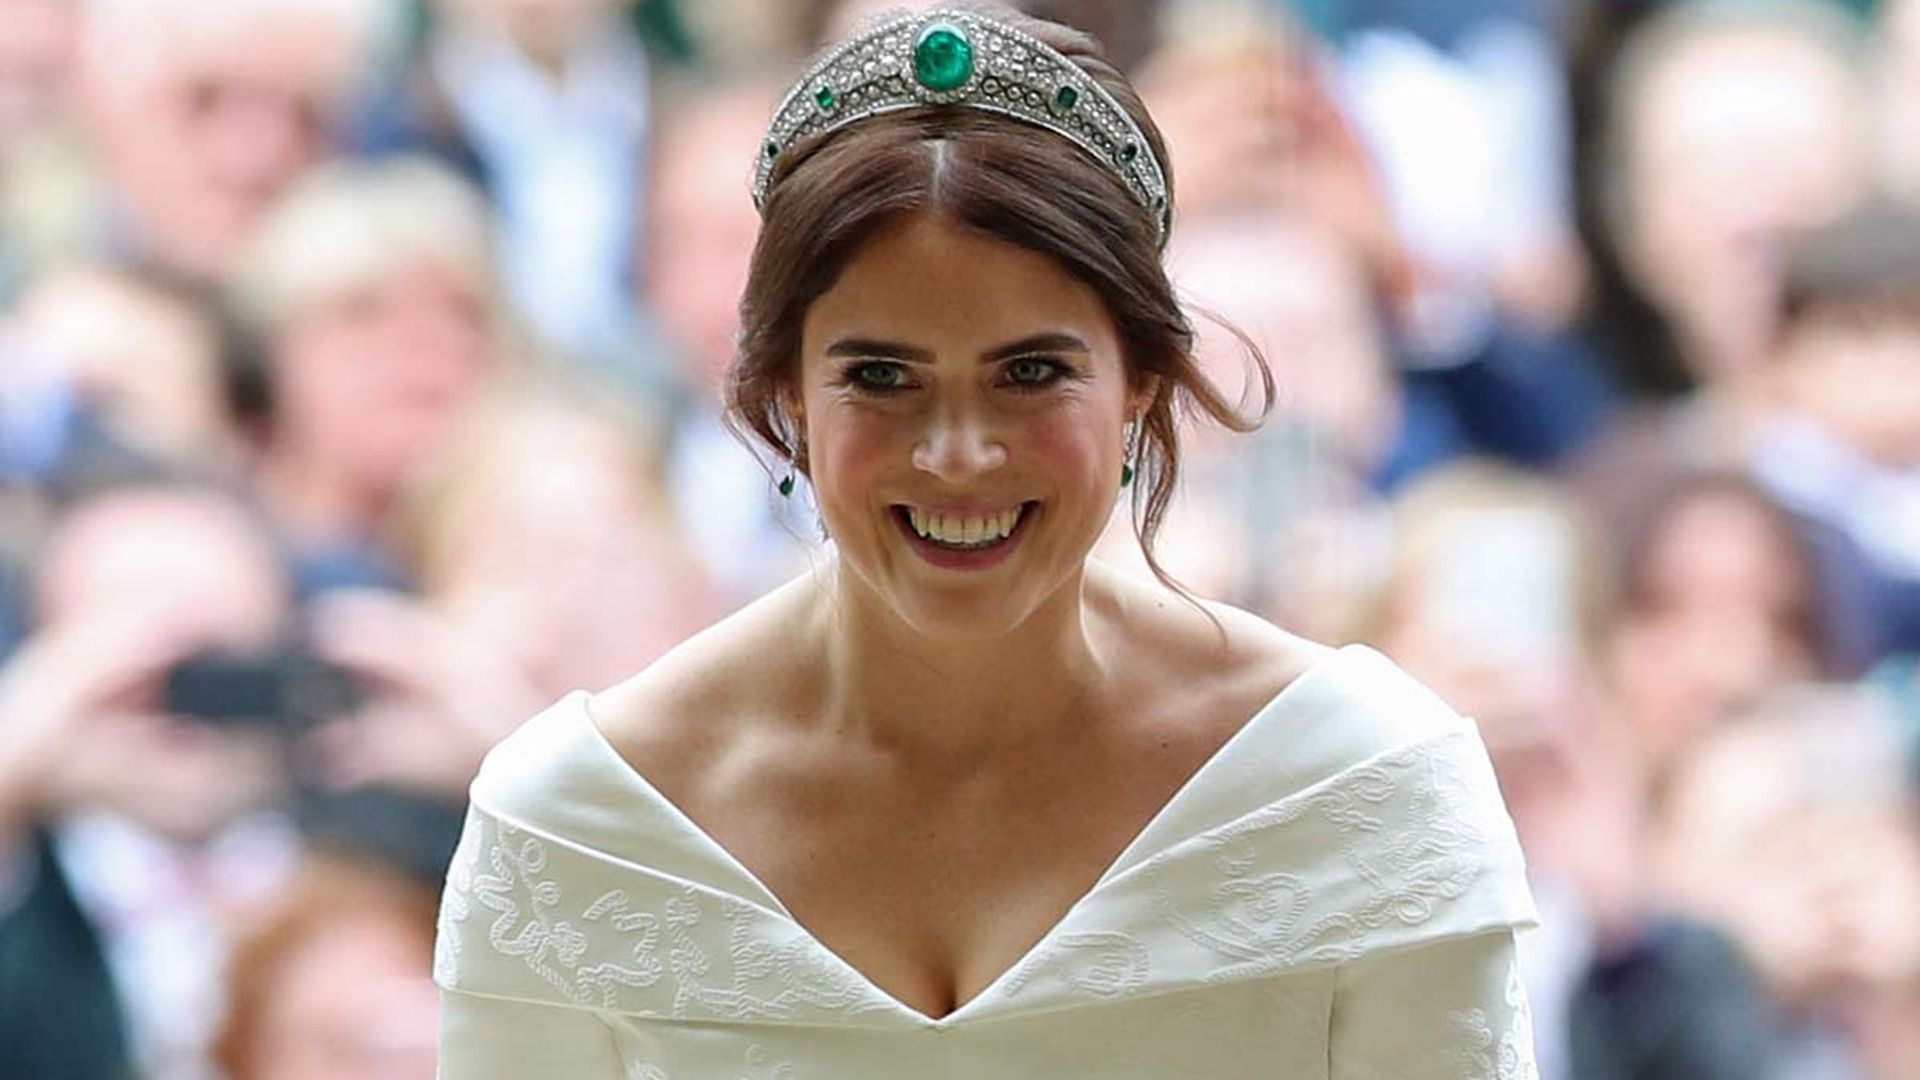 Princess Eugenie's wedding dress designer has created a gown for this celebrity bride